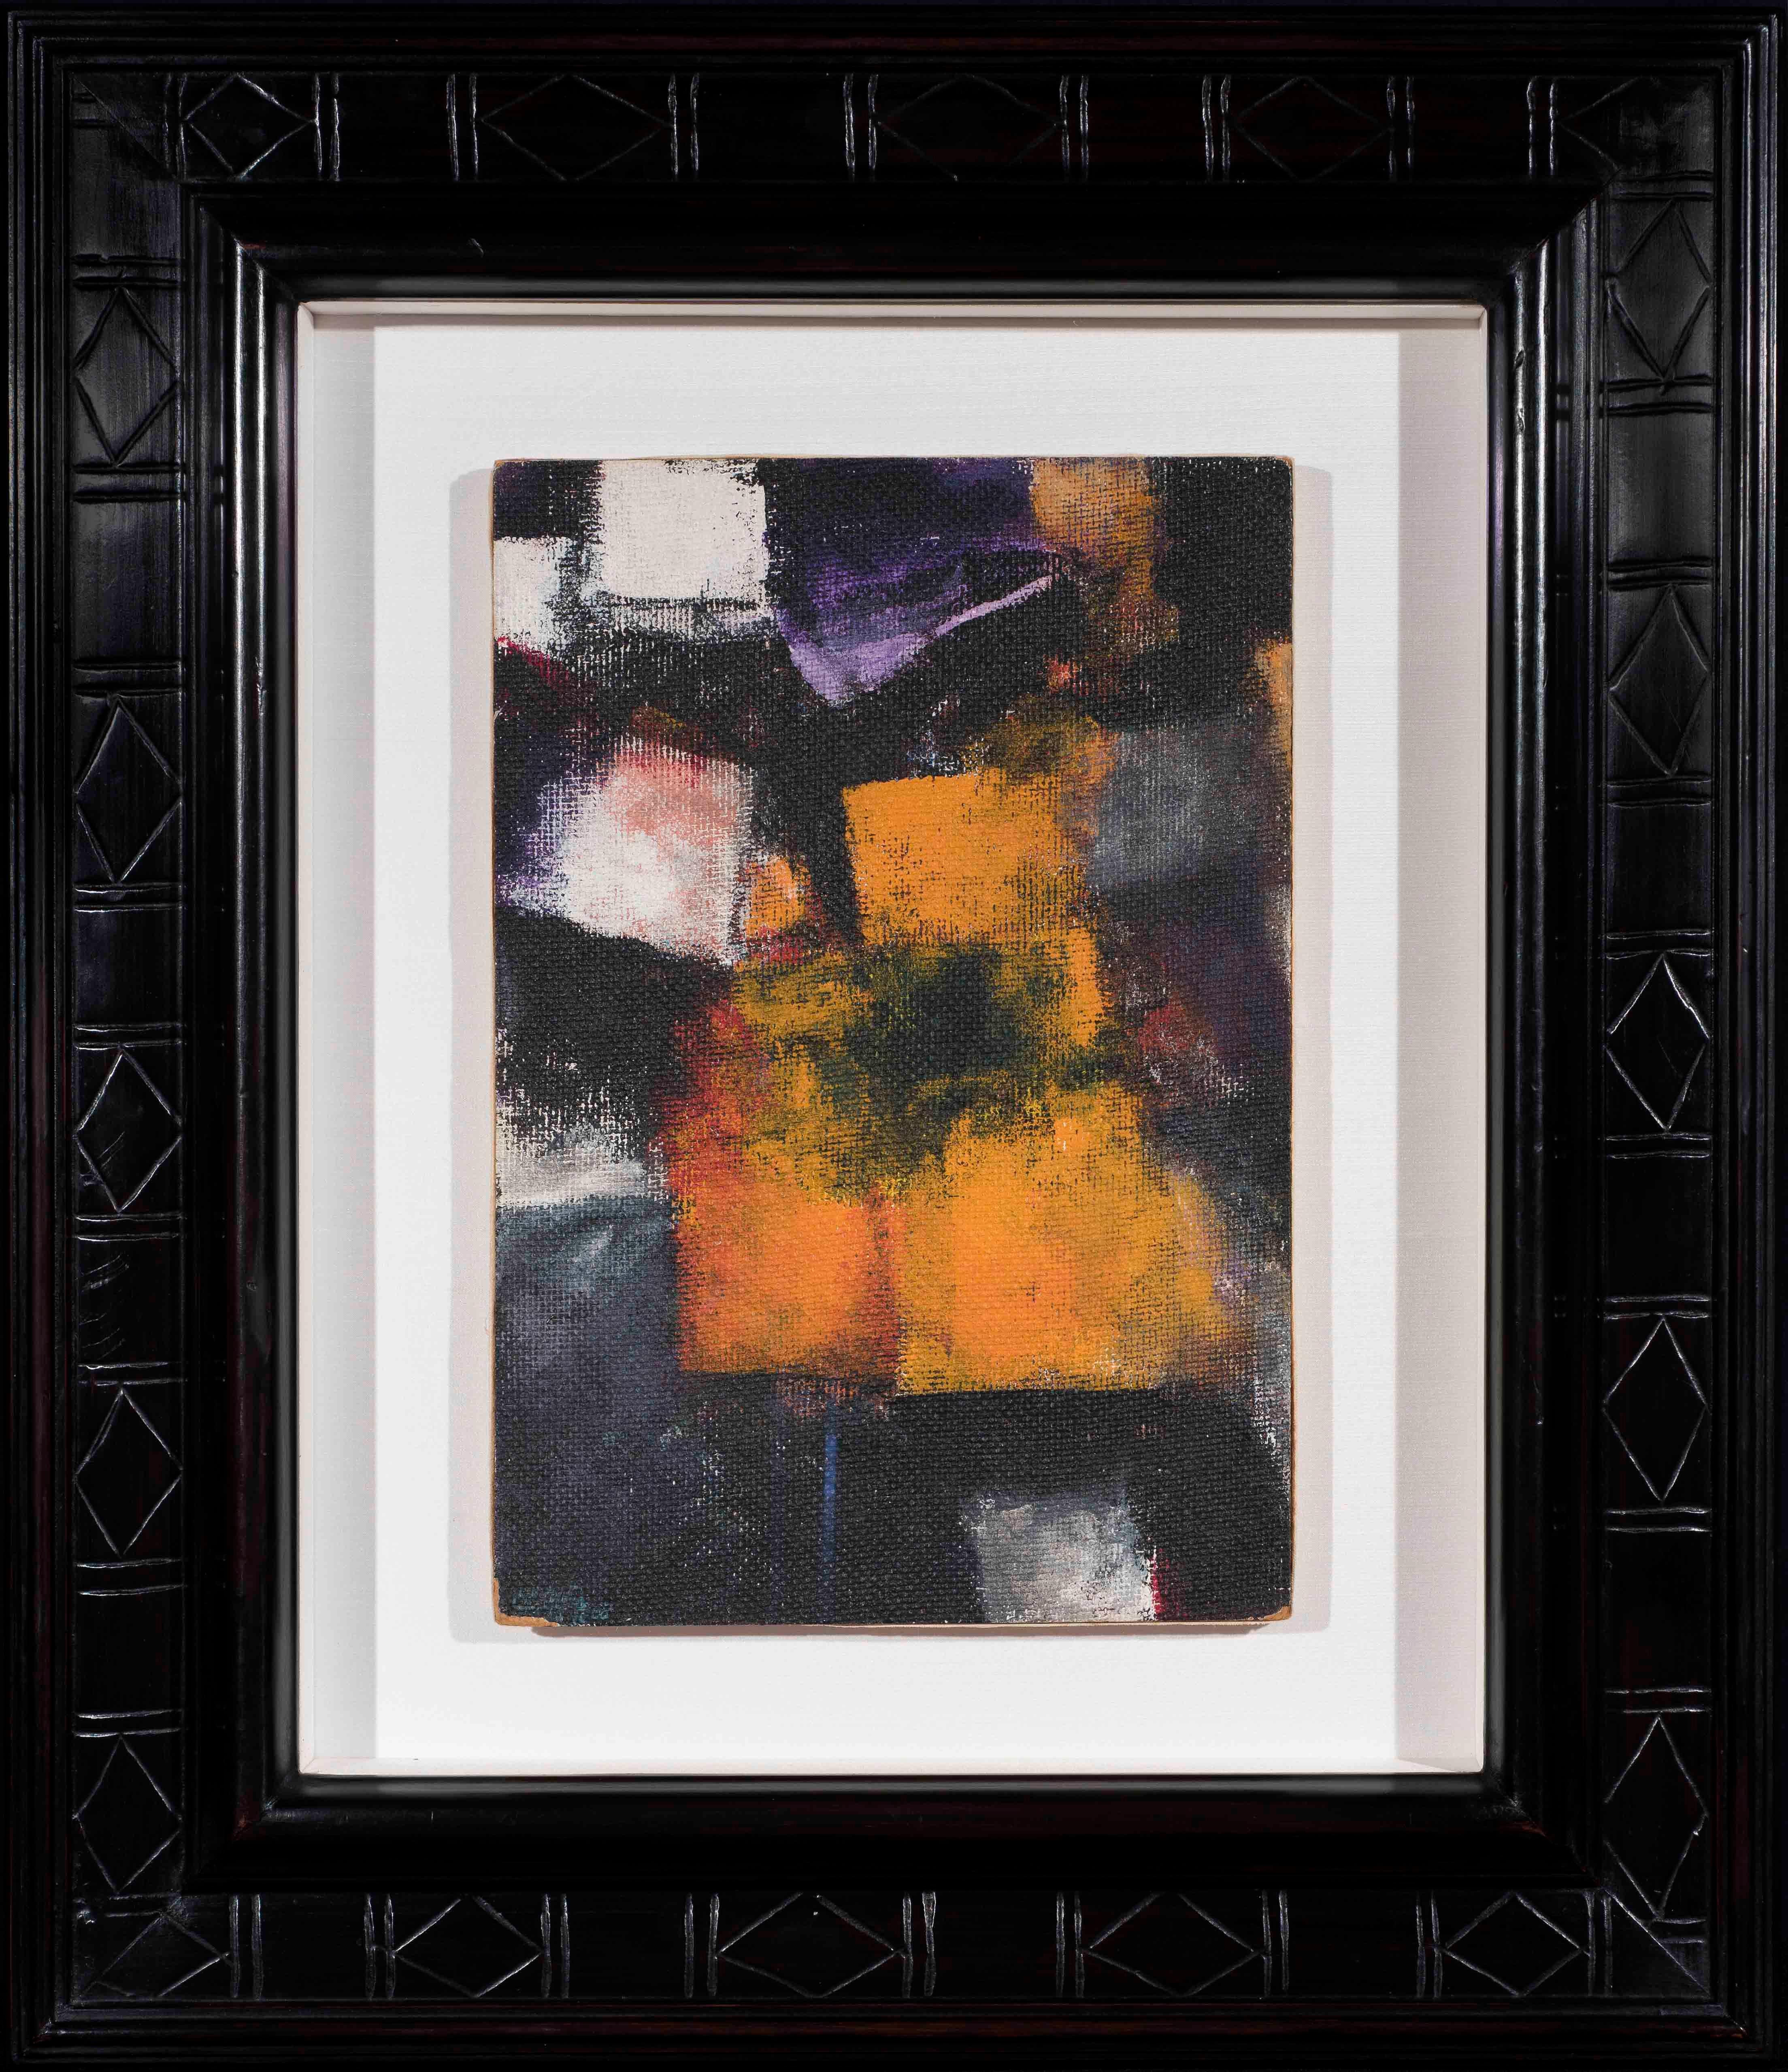 Composition in orange and black - Painting by Avigdor Arikha